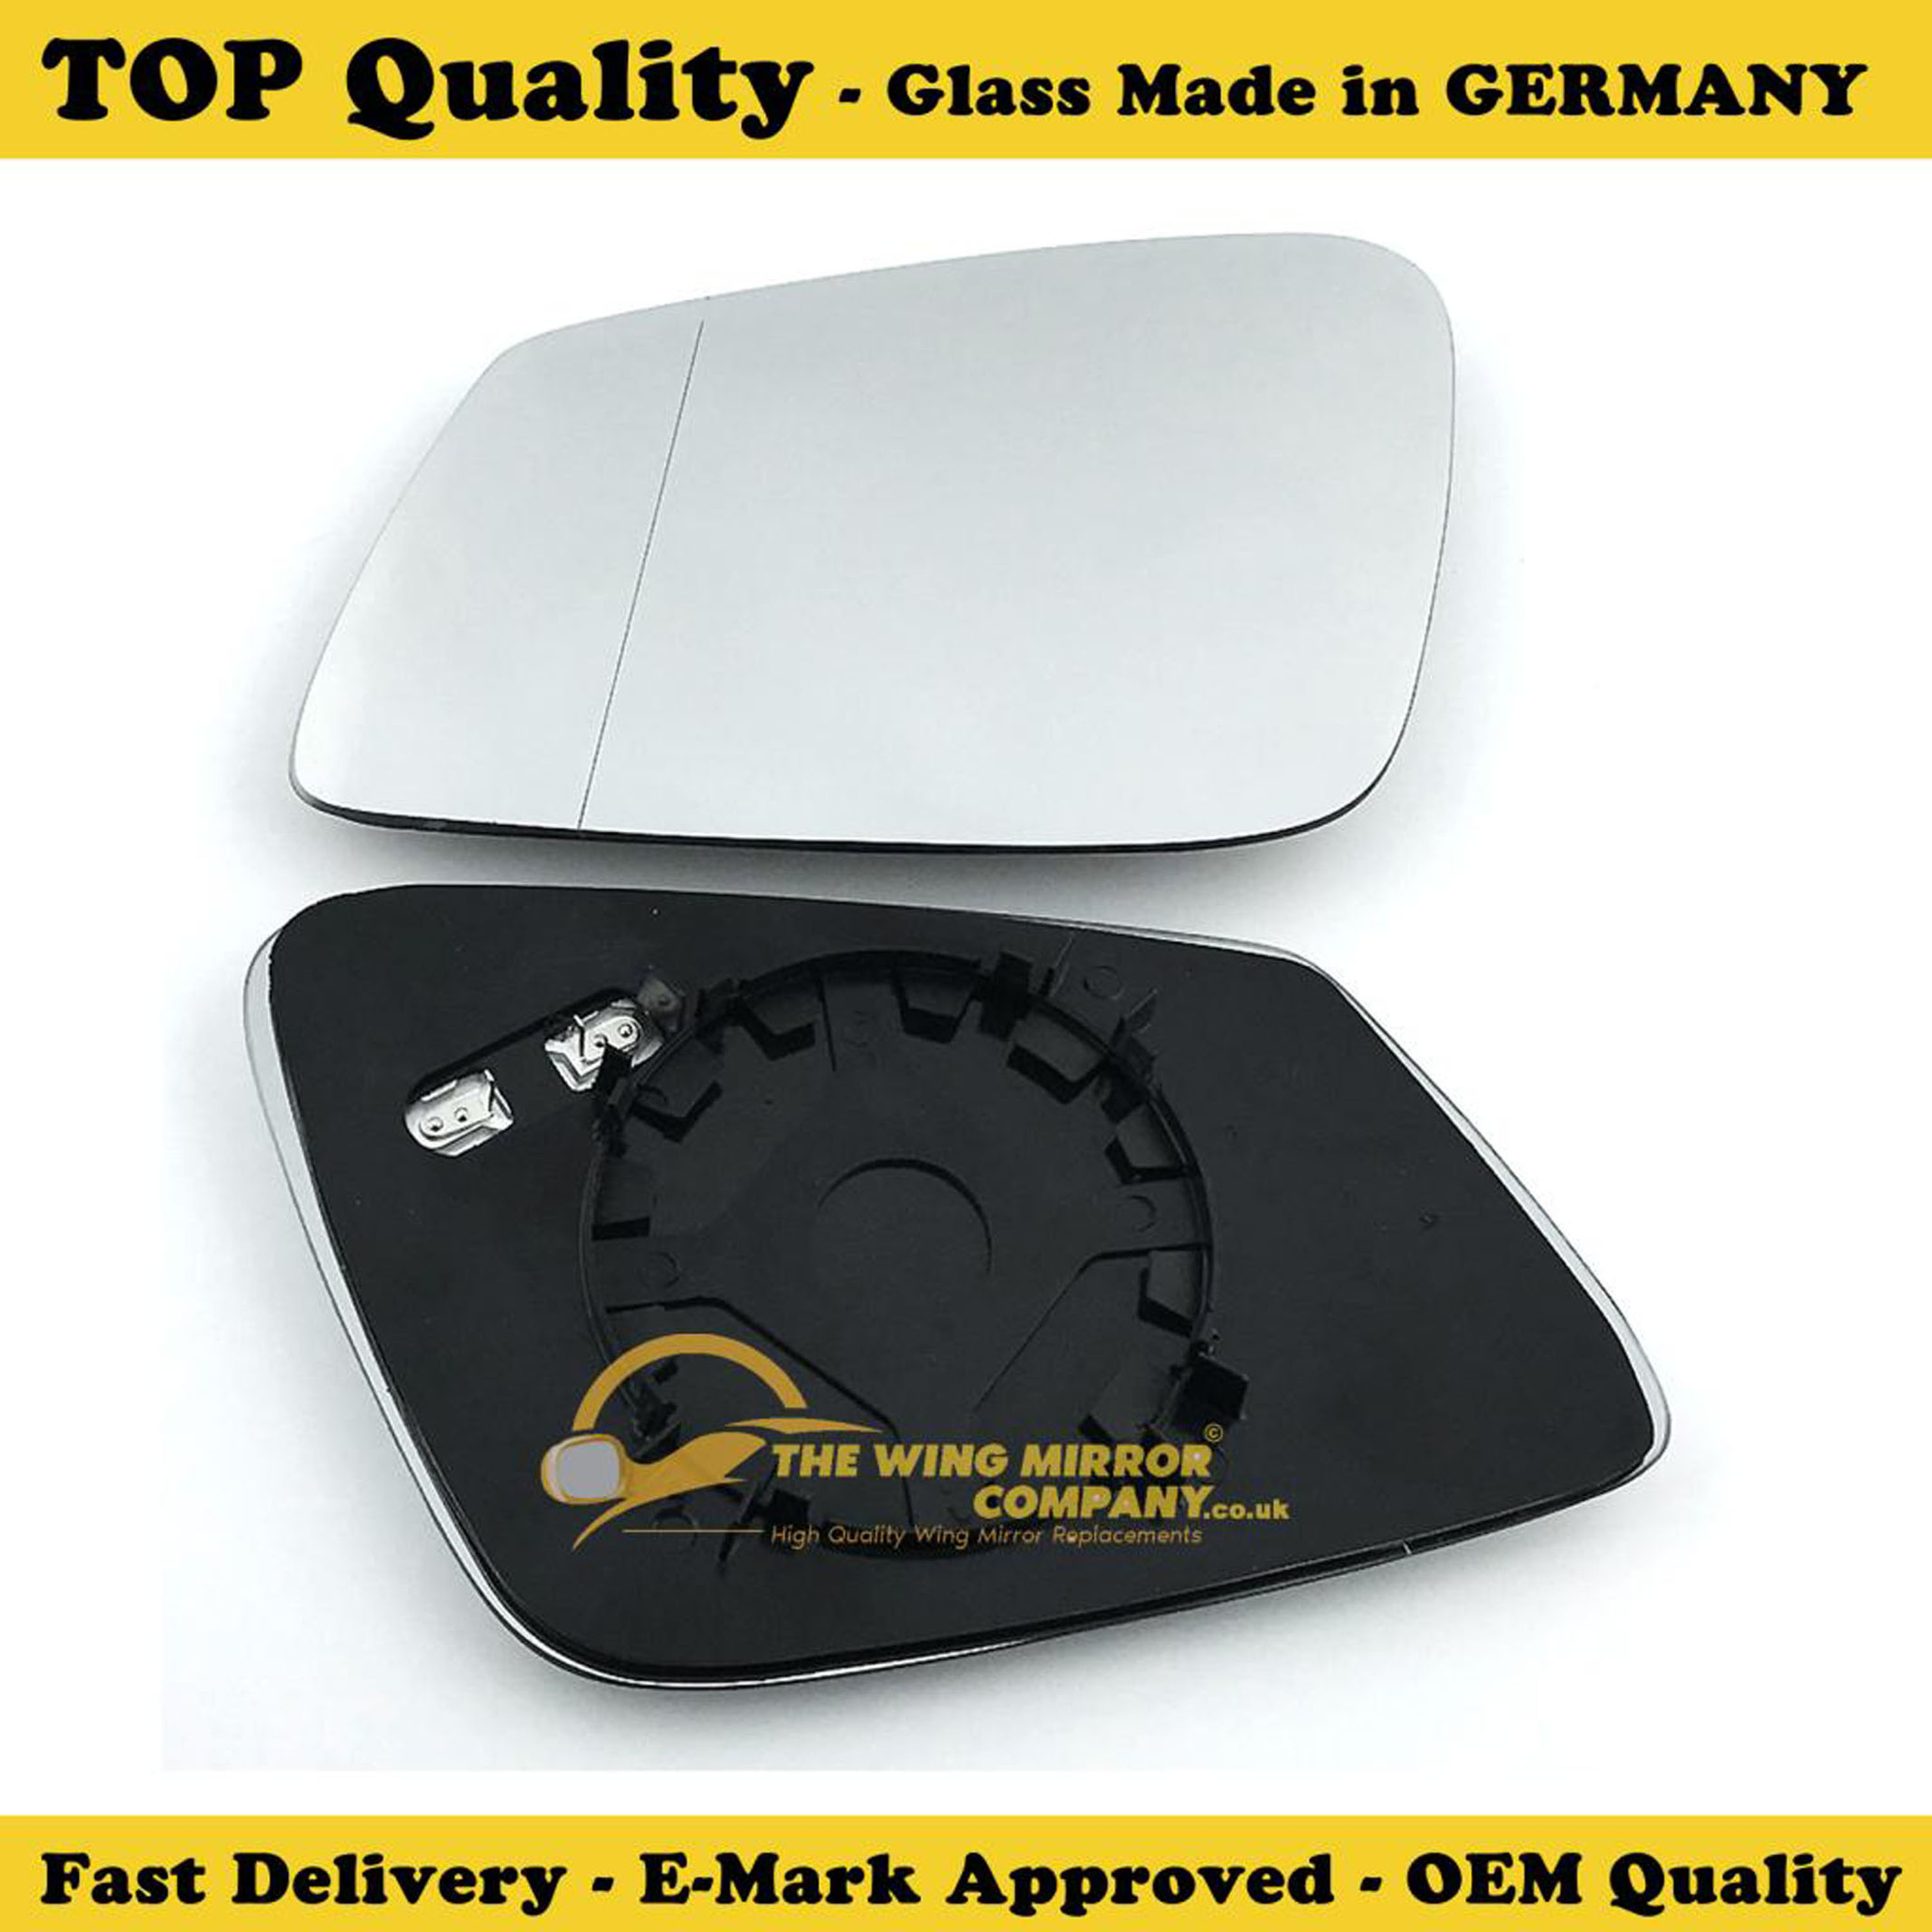 Passenger Side Wing Mirror Replacements, The Wing Mirror Company Uk